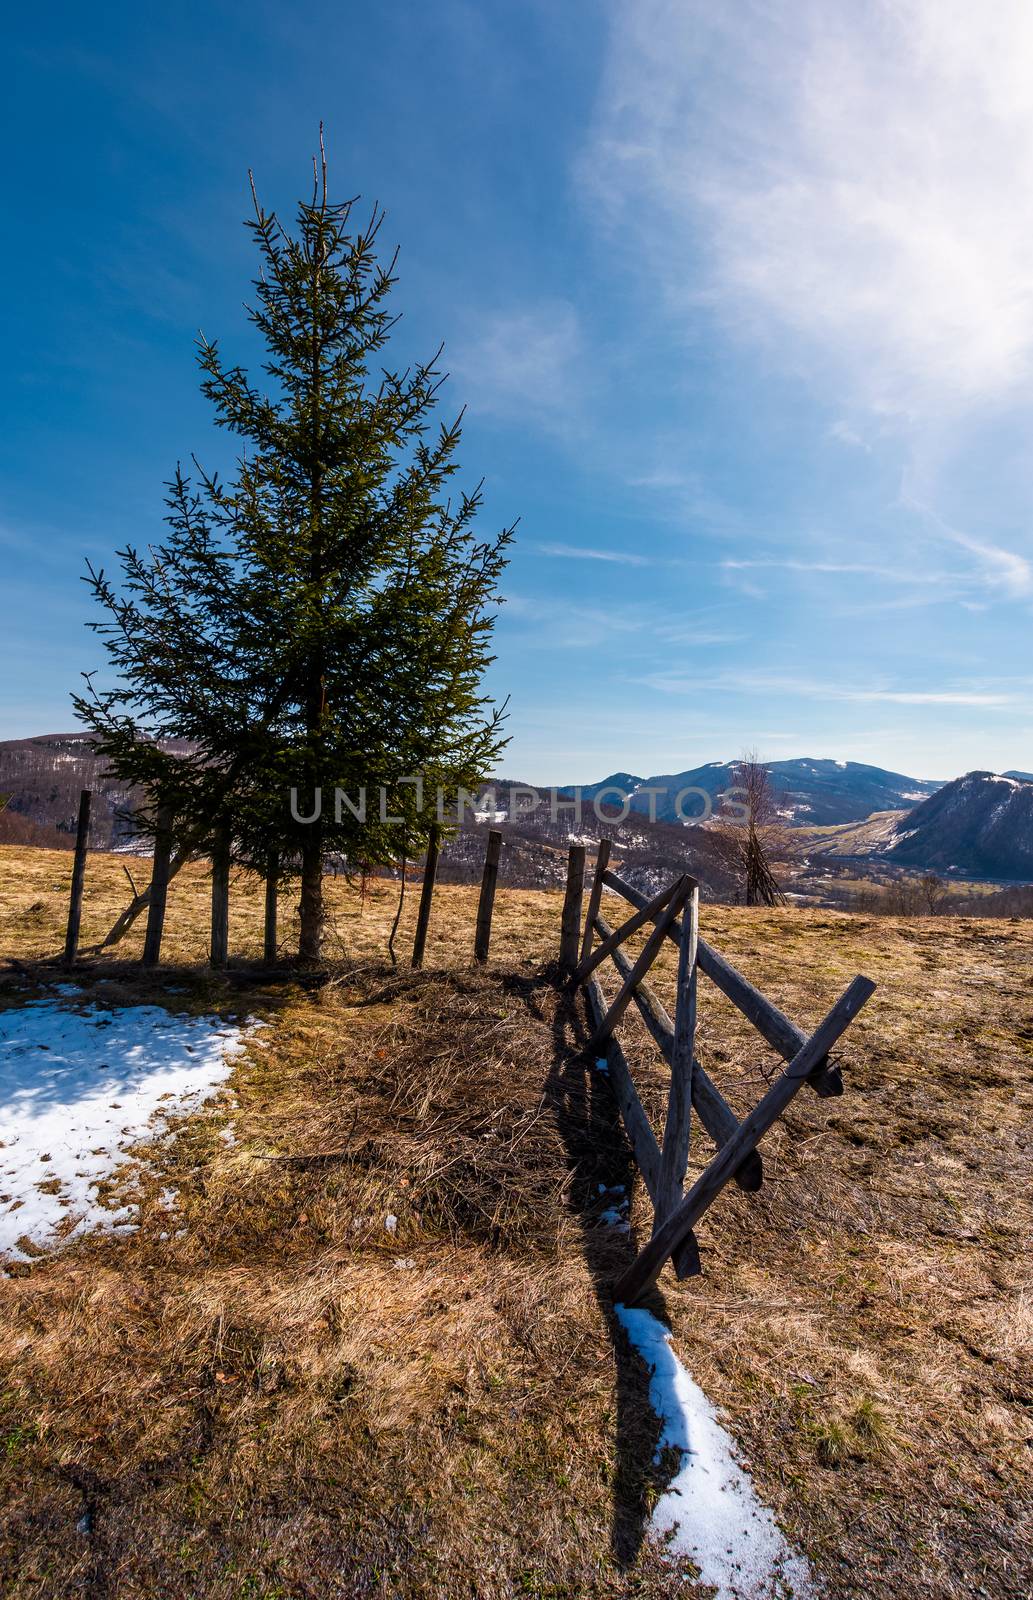 spruce tree near the fence in mountains by Pellinni